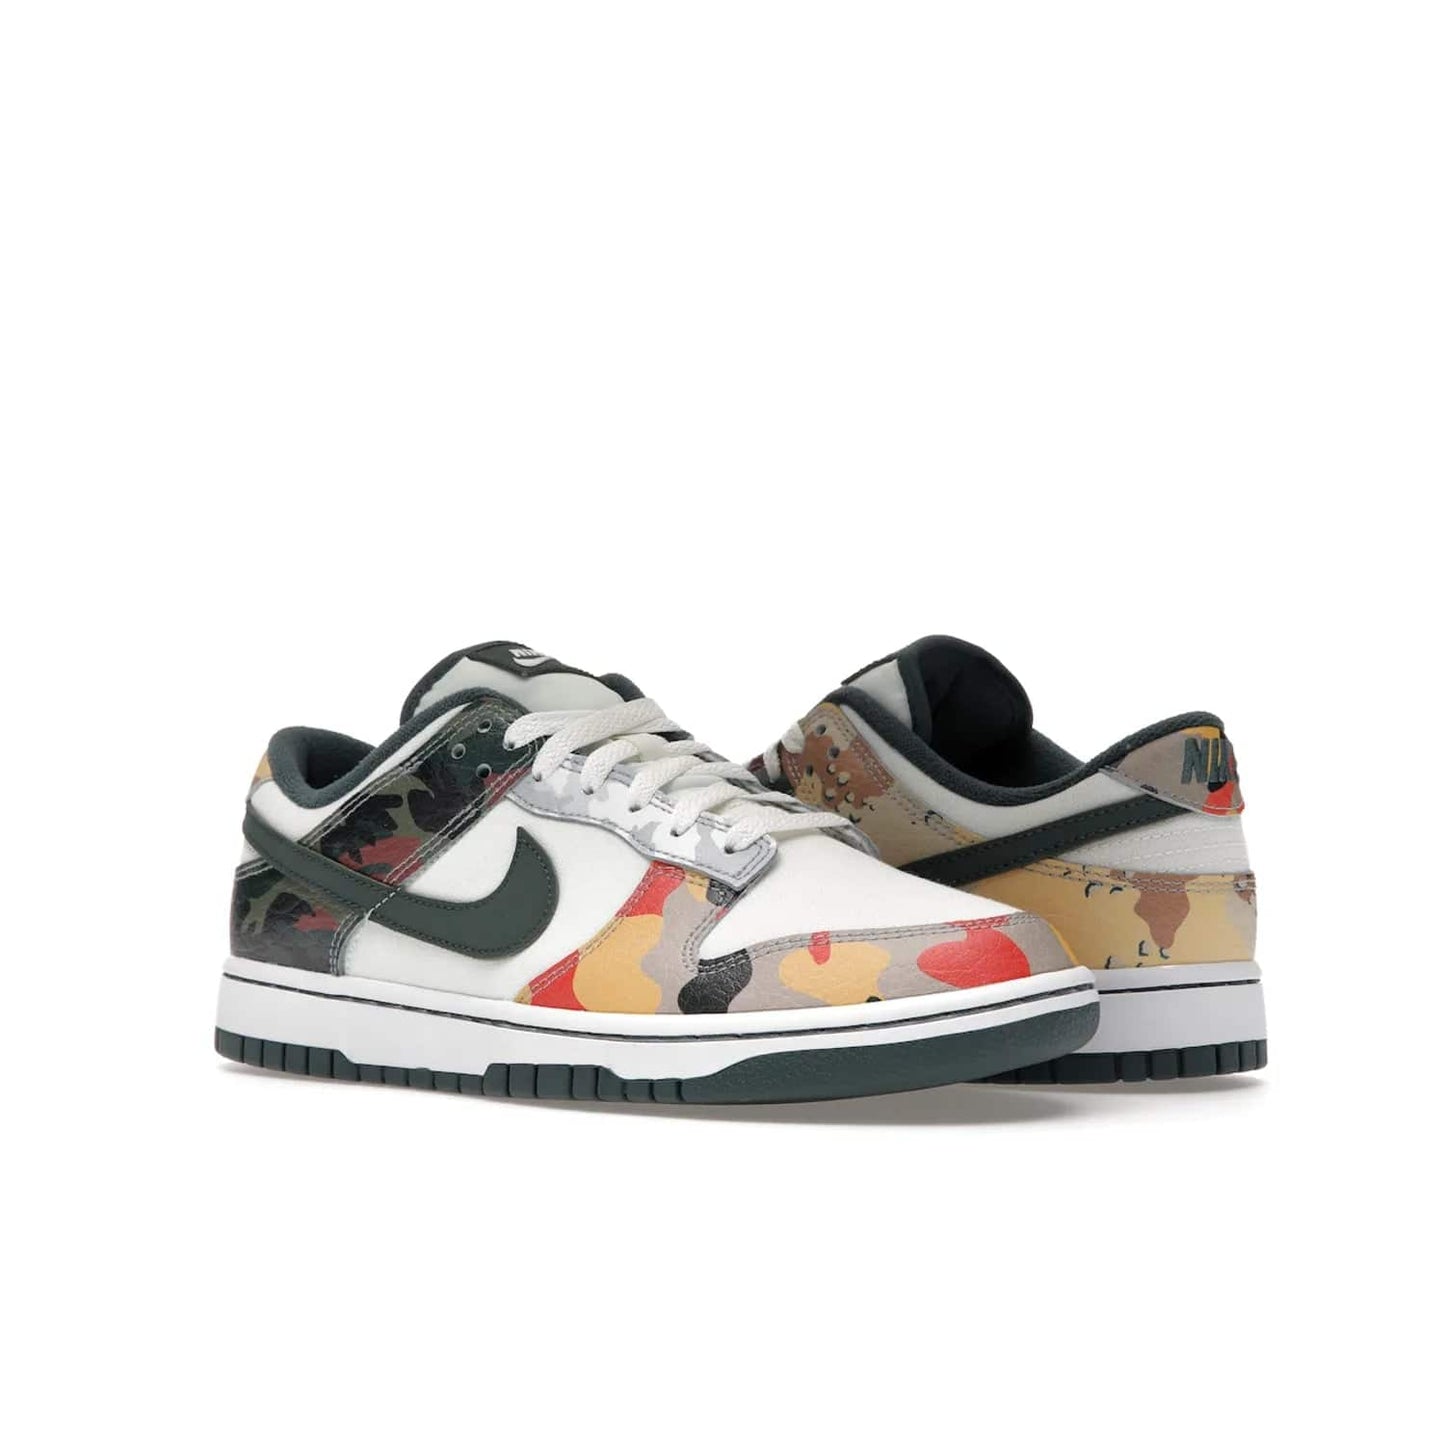 Nike Dunk Low SE Sail Multi-Camo - Image 5 - Only at www.BallersClubKickz.com - Classic design meets statement style in the Nike Dunk Low SE Sail Multi-Camo. White leather base with multi-color camo overlays, vibrant Nike Swooshes, and orange Nike embroidery. Get yours August 2021.